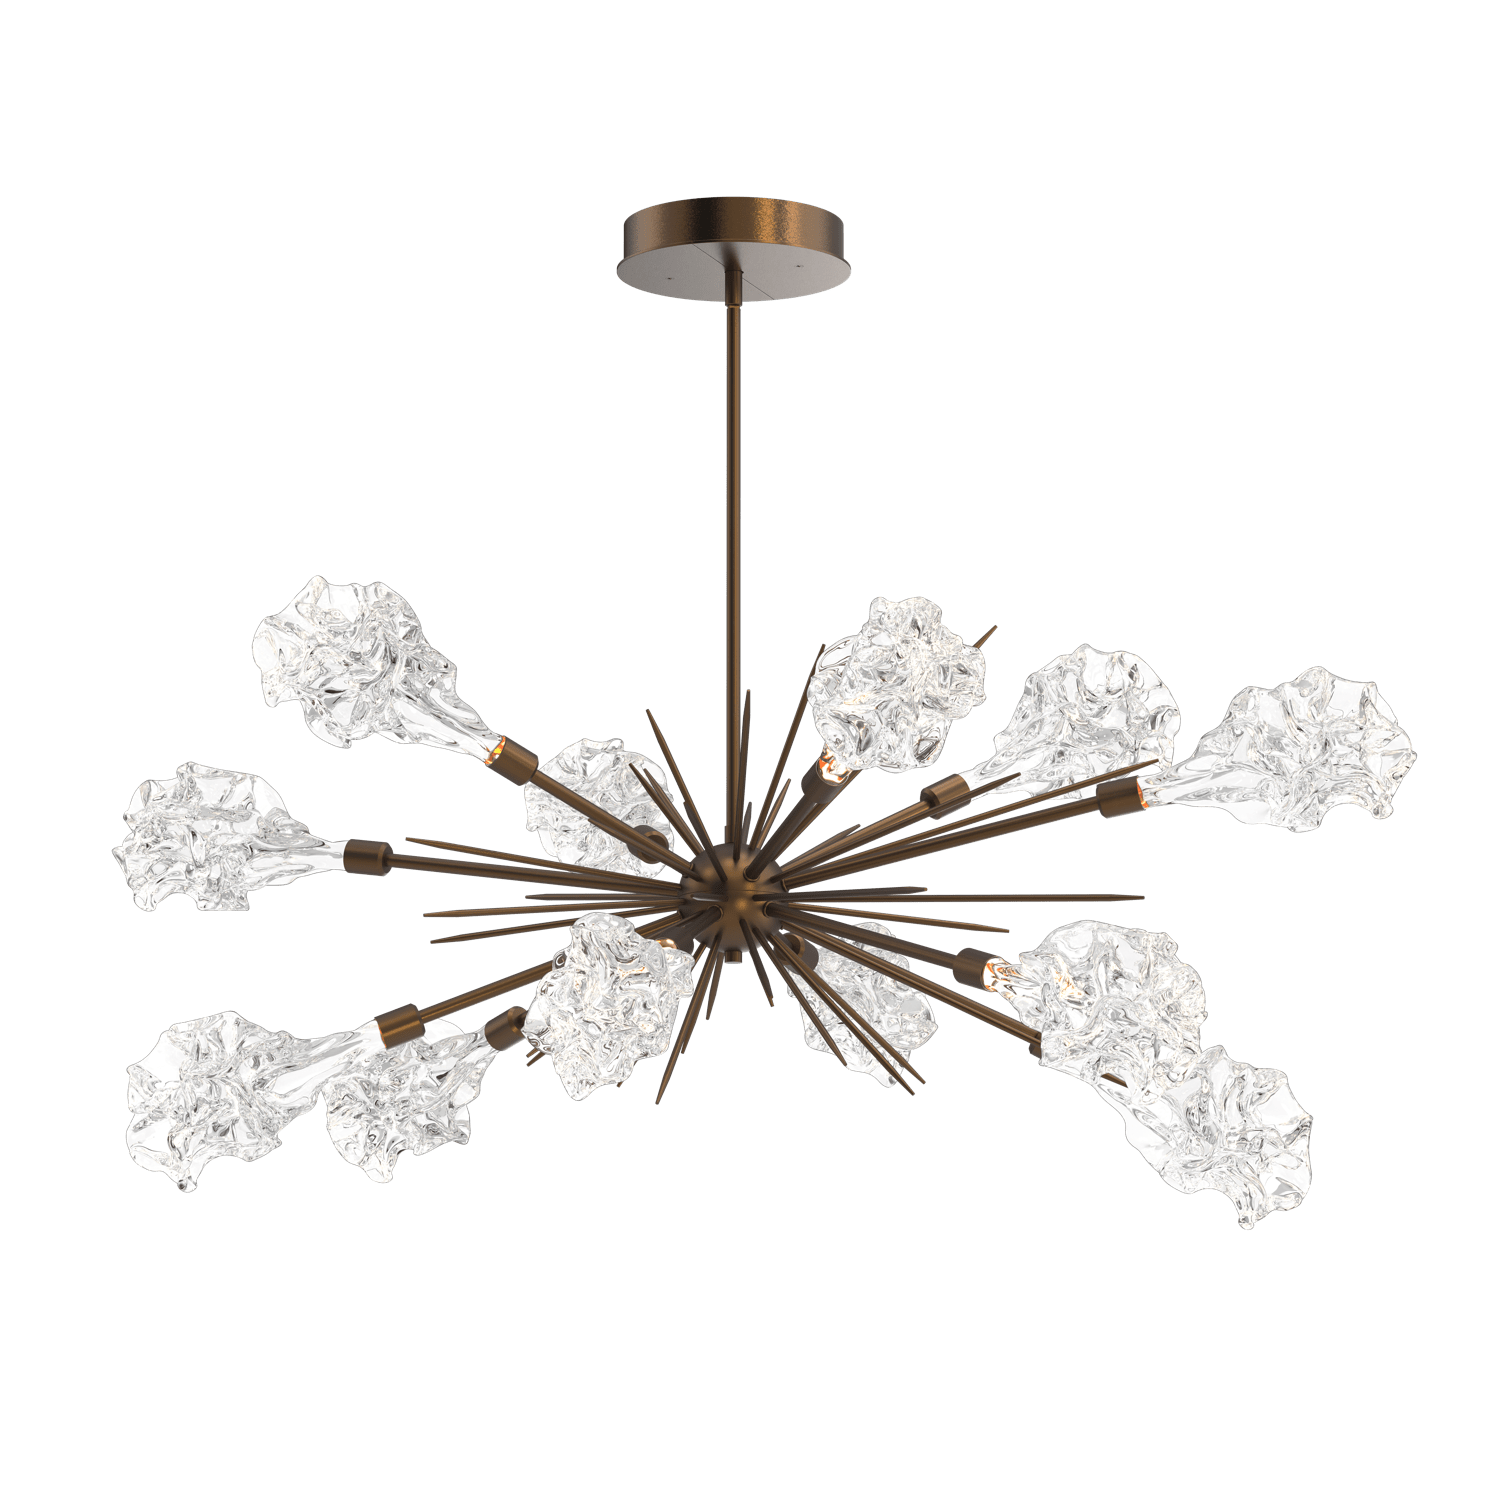 PLB0059-0A-FB-Hammerton-Studio-Blossom-47-inch-oval-starburst-chandelier-with-flat-bronze-finish-and-clear-handblown-crystal-glass-shades-and-LED-lamping